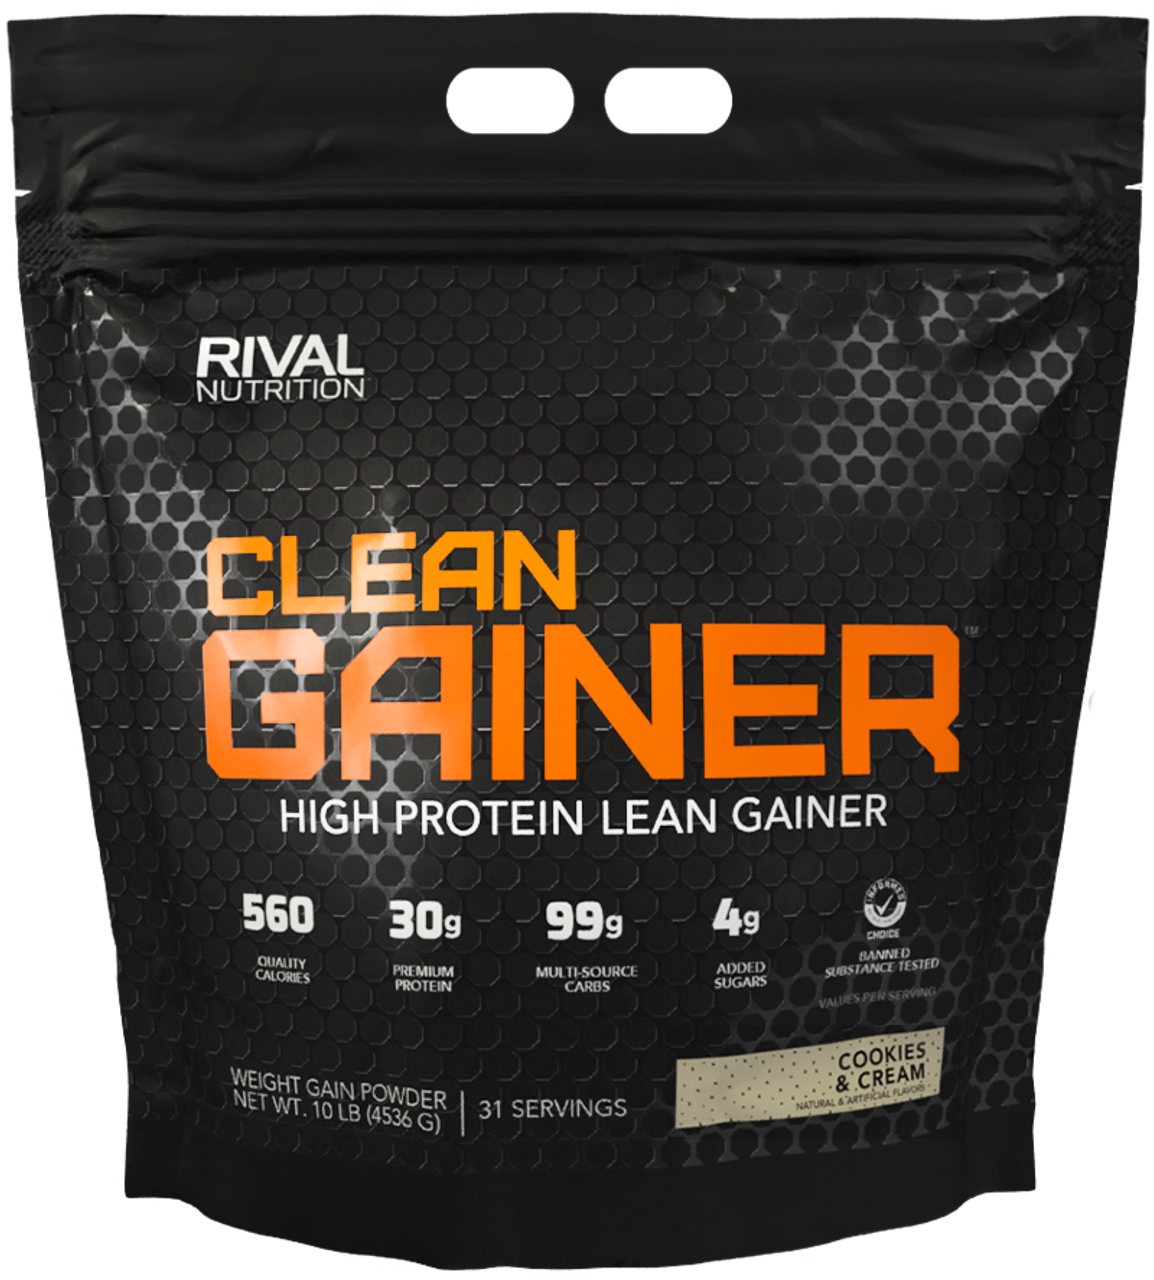 Clean Gainer by Rival Nutrition